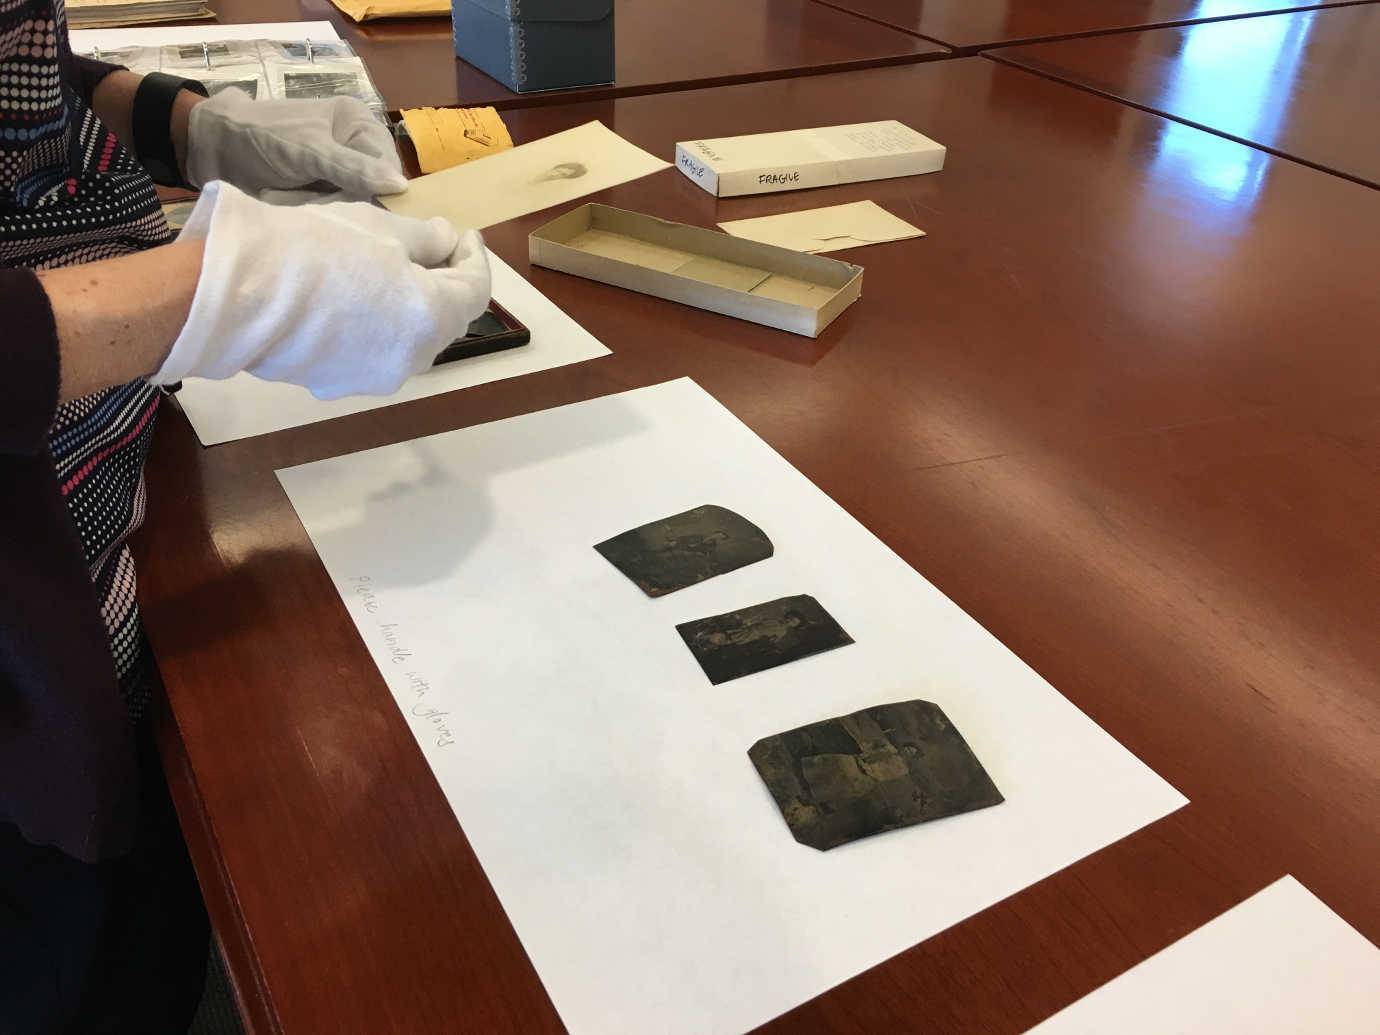 A conservator examines tintypes during a preservation assessment at a community college. Image courtesy of LYRASIS.